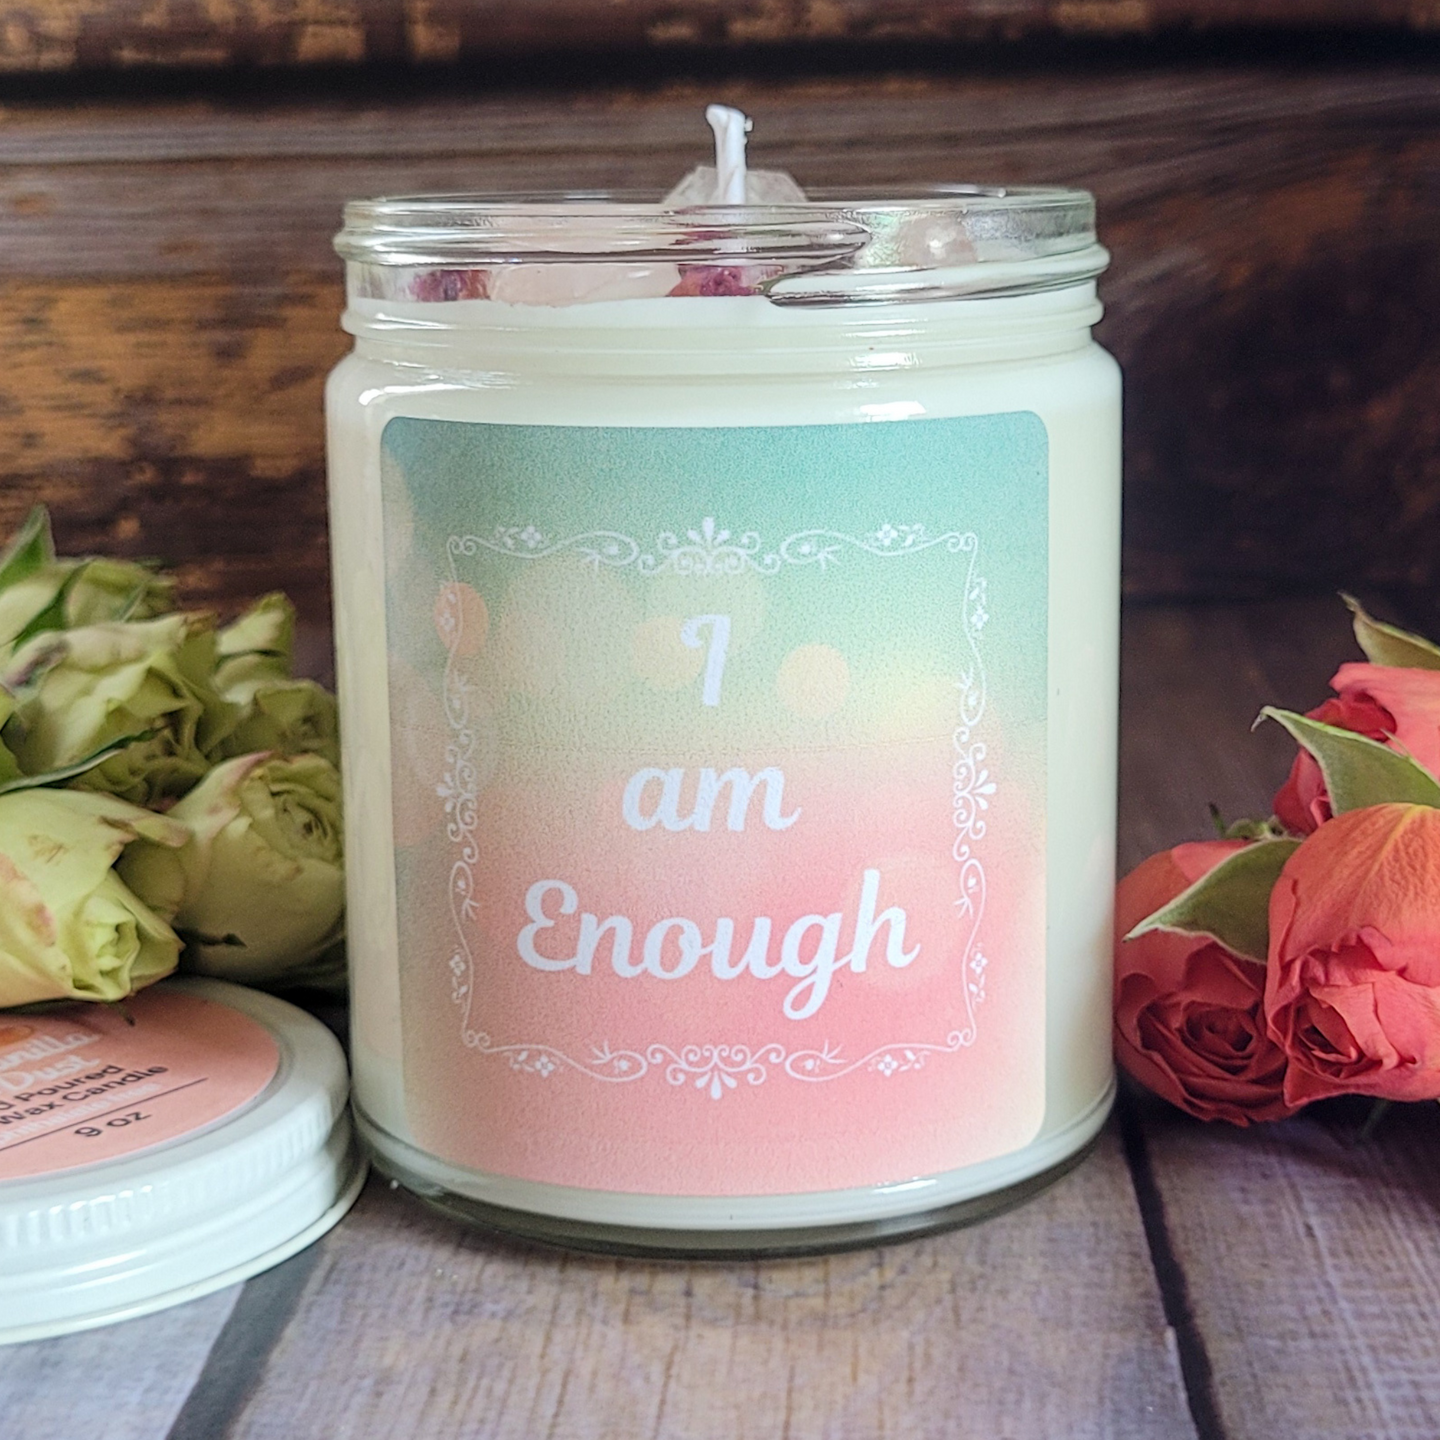 Self worth intention candle